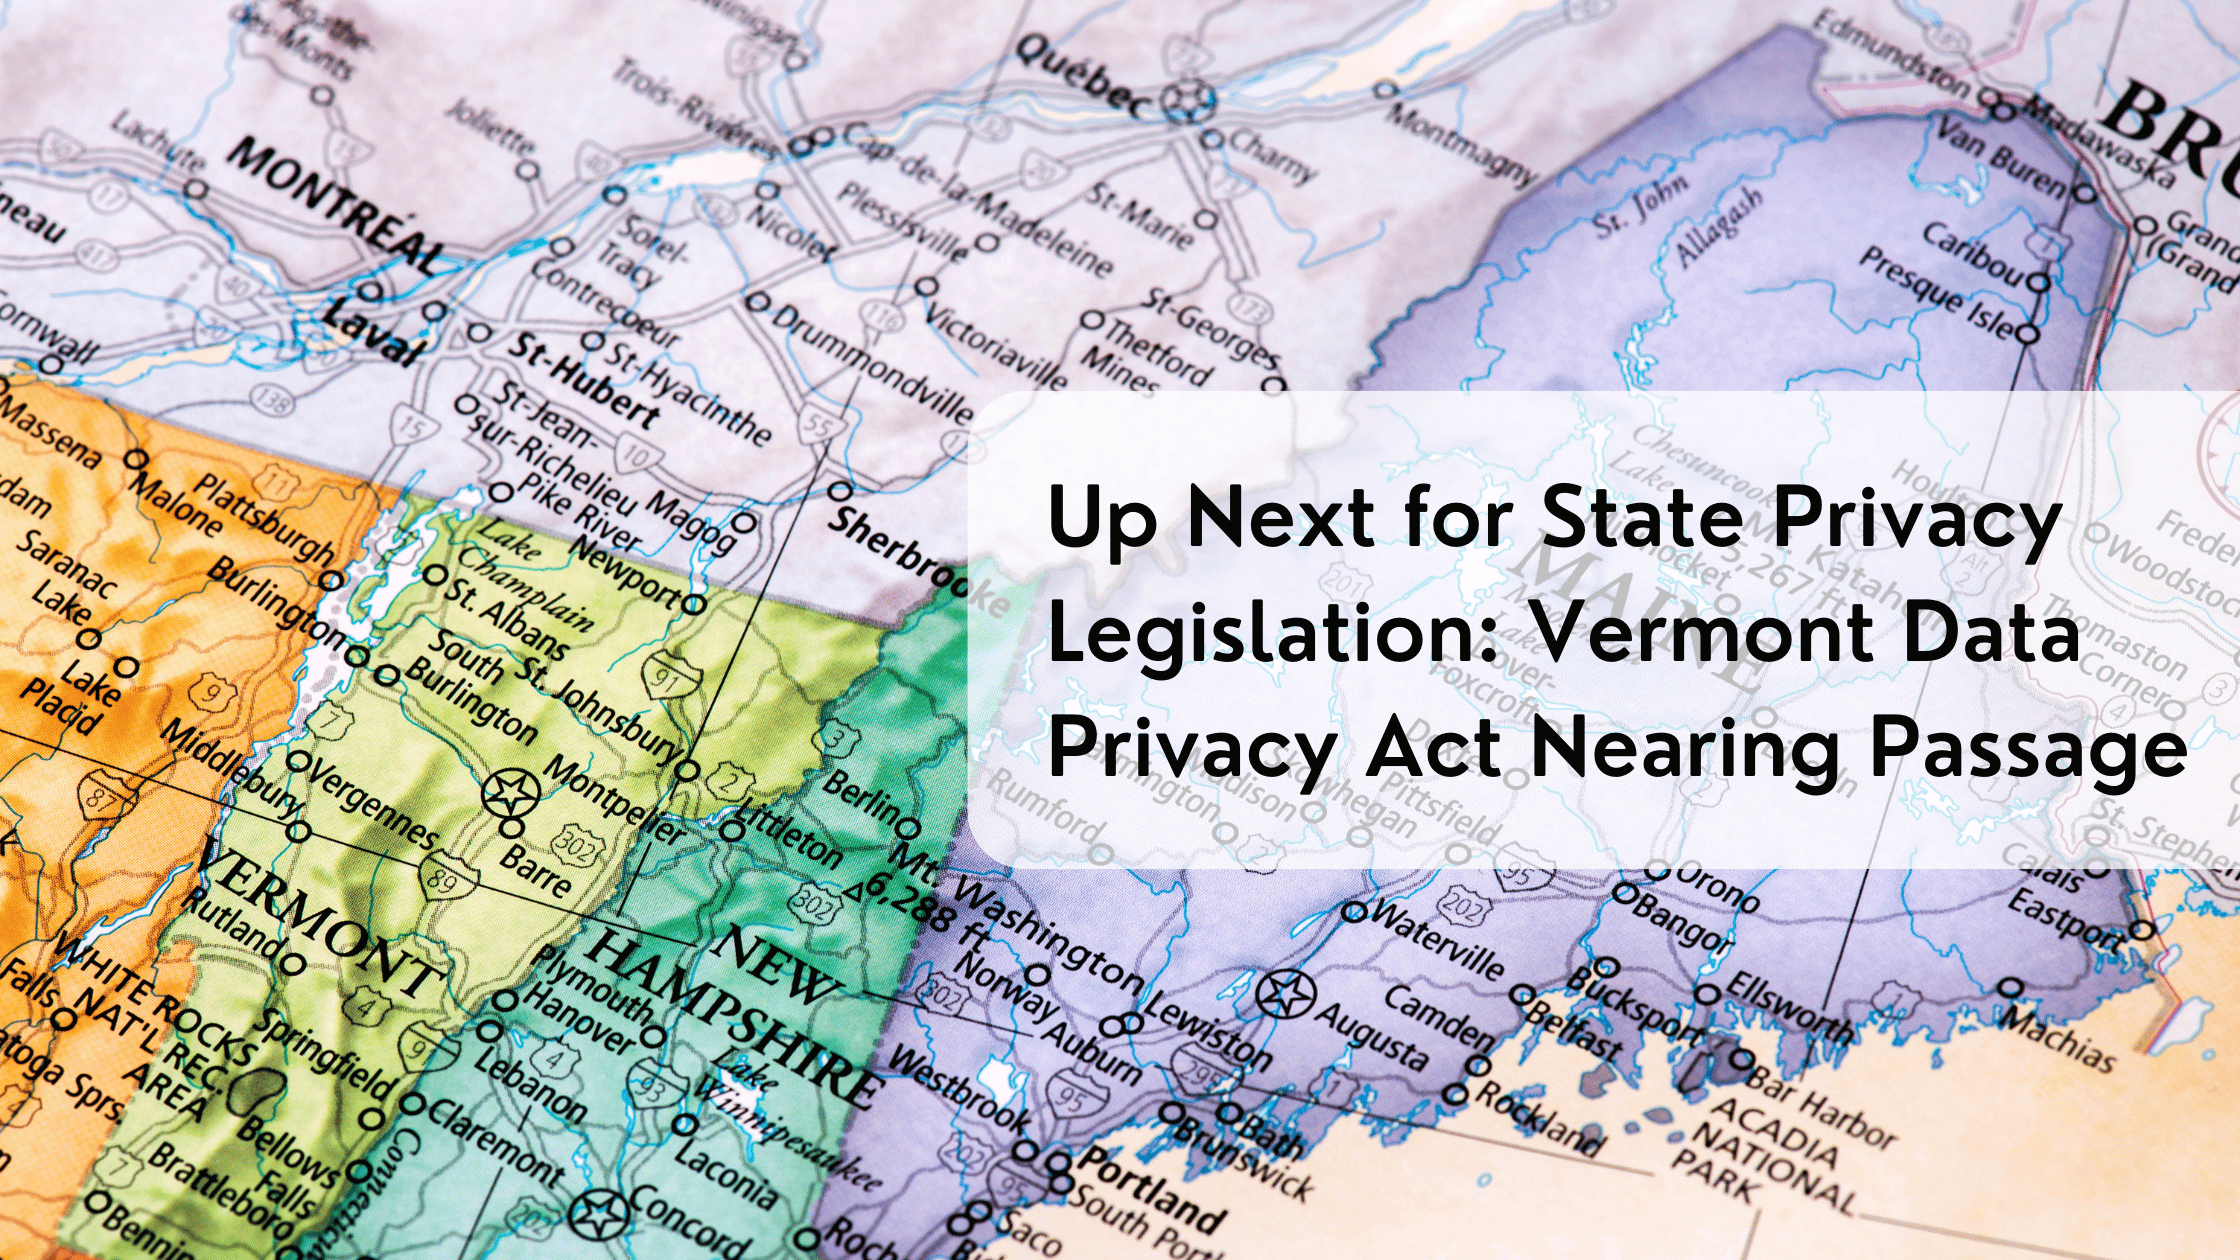 Vermont Data Privacy Act Nearing Passage